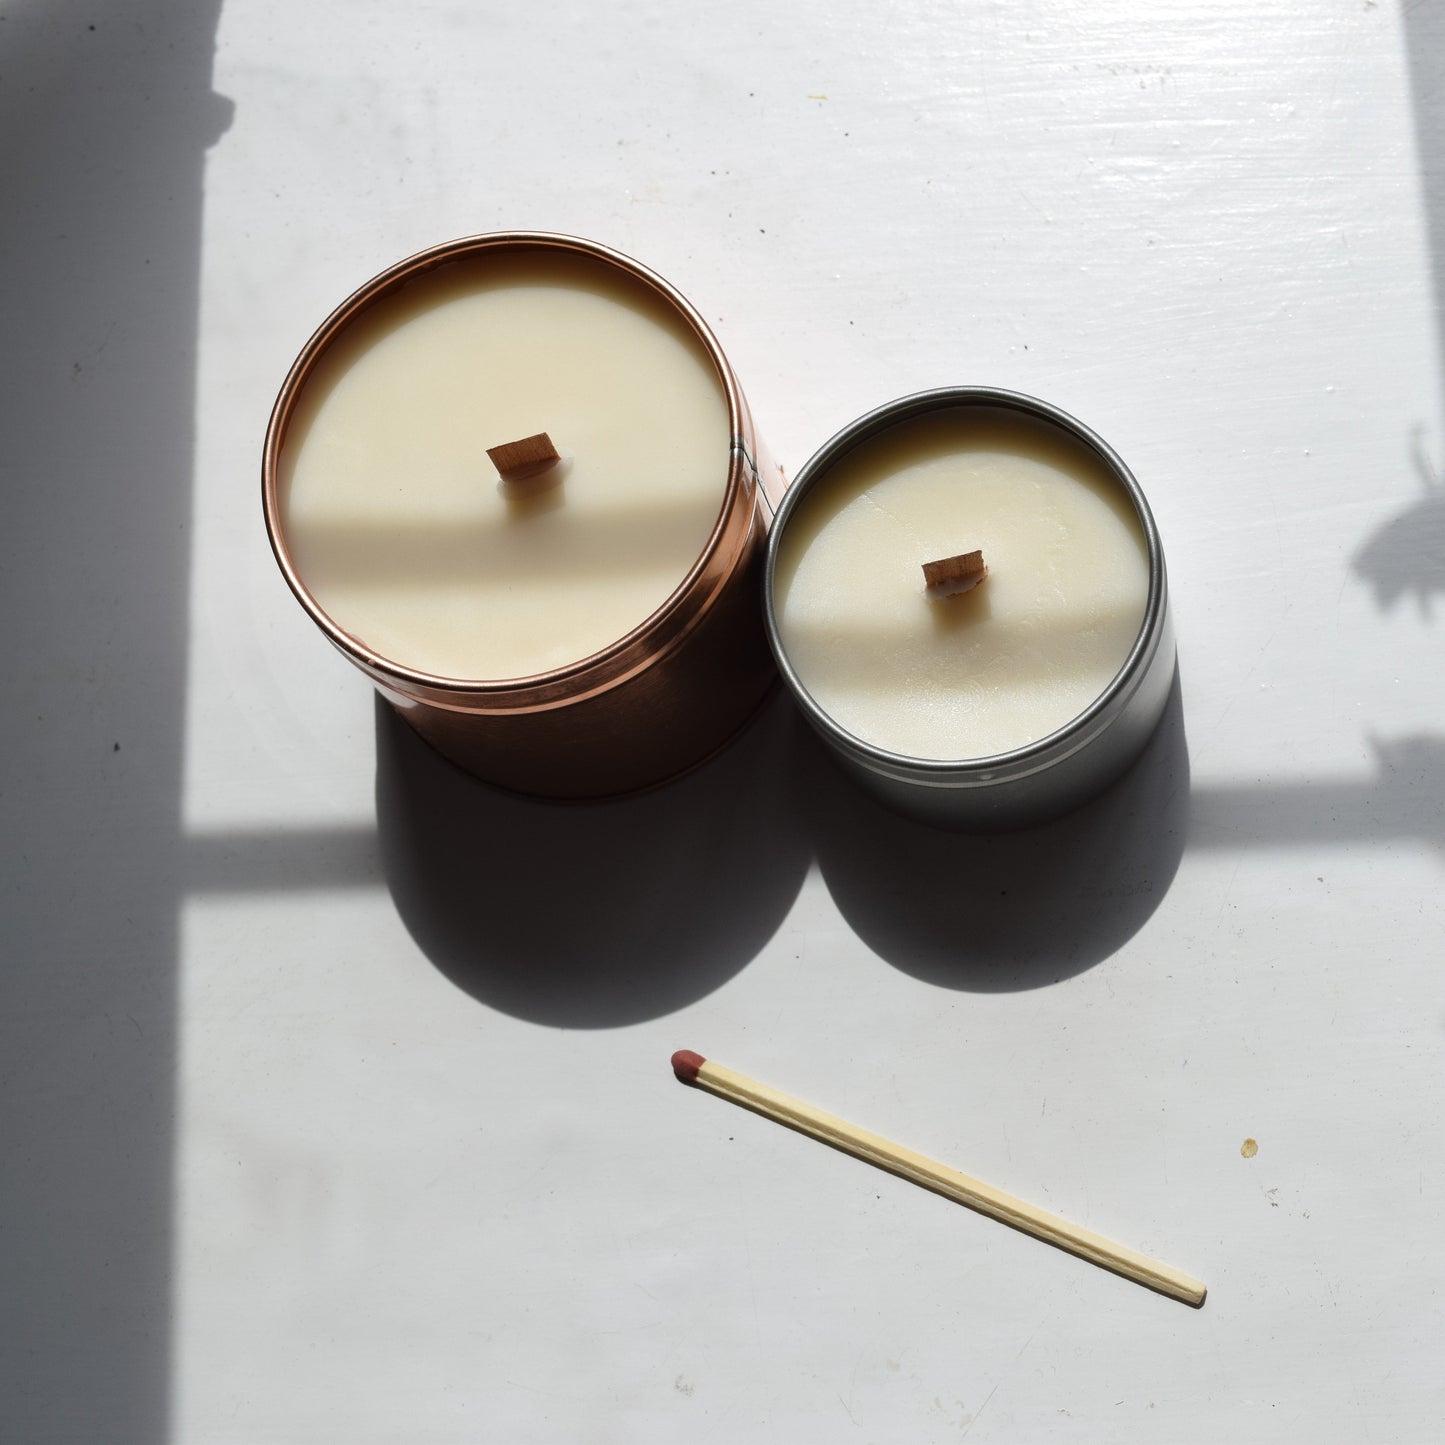 Hush CBD candle. CBD candles are the highest rated calming candles. All our candles are hand crafted and made using exclusively sustainable products. We travel around Cornwall markets. Available to bulk buy, white label and wholesale. CBD infused candle.